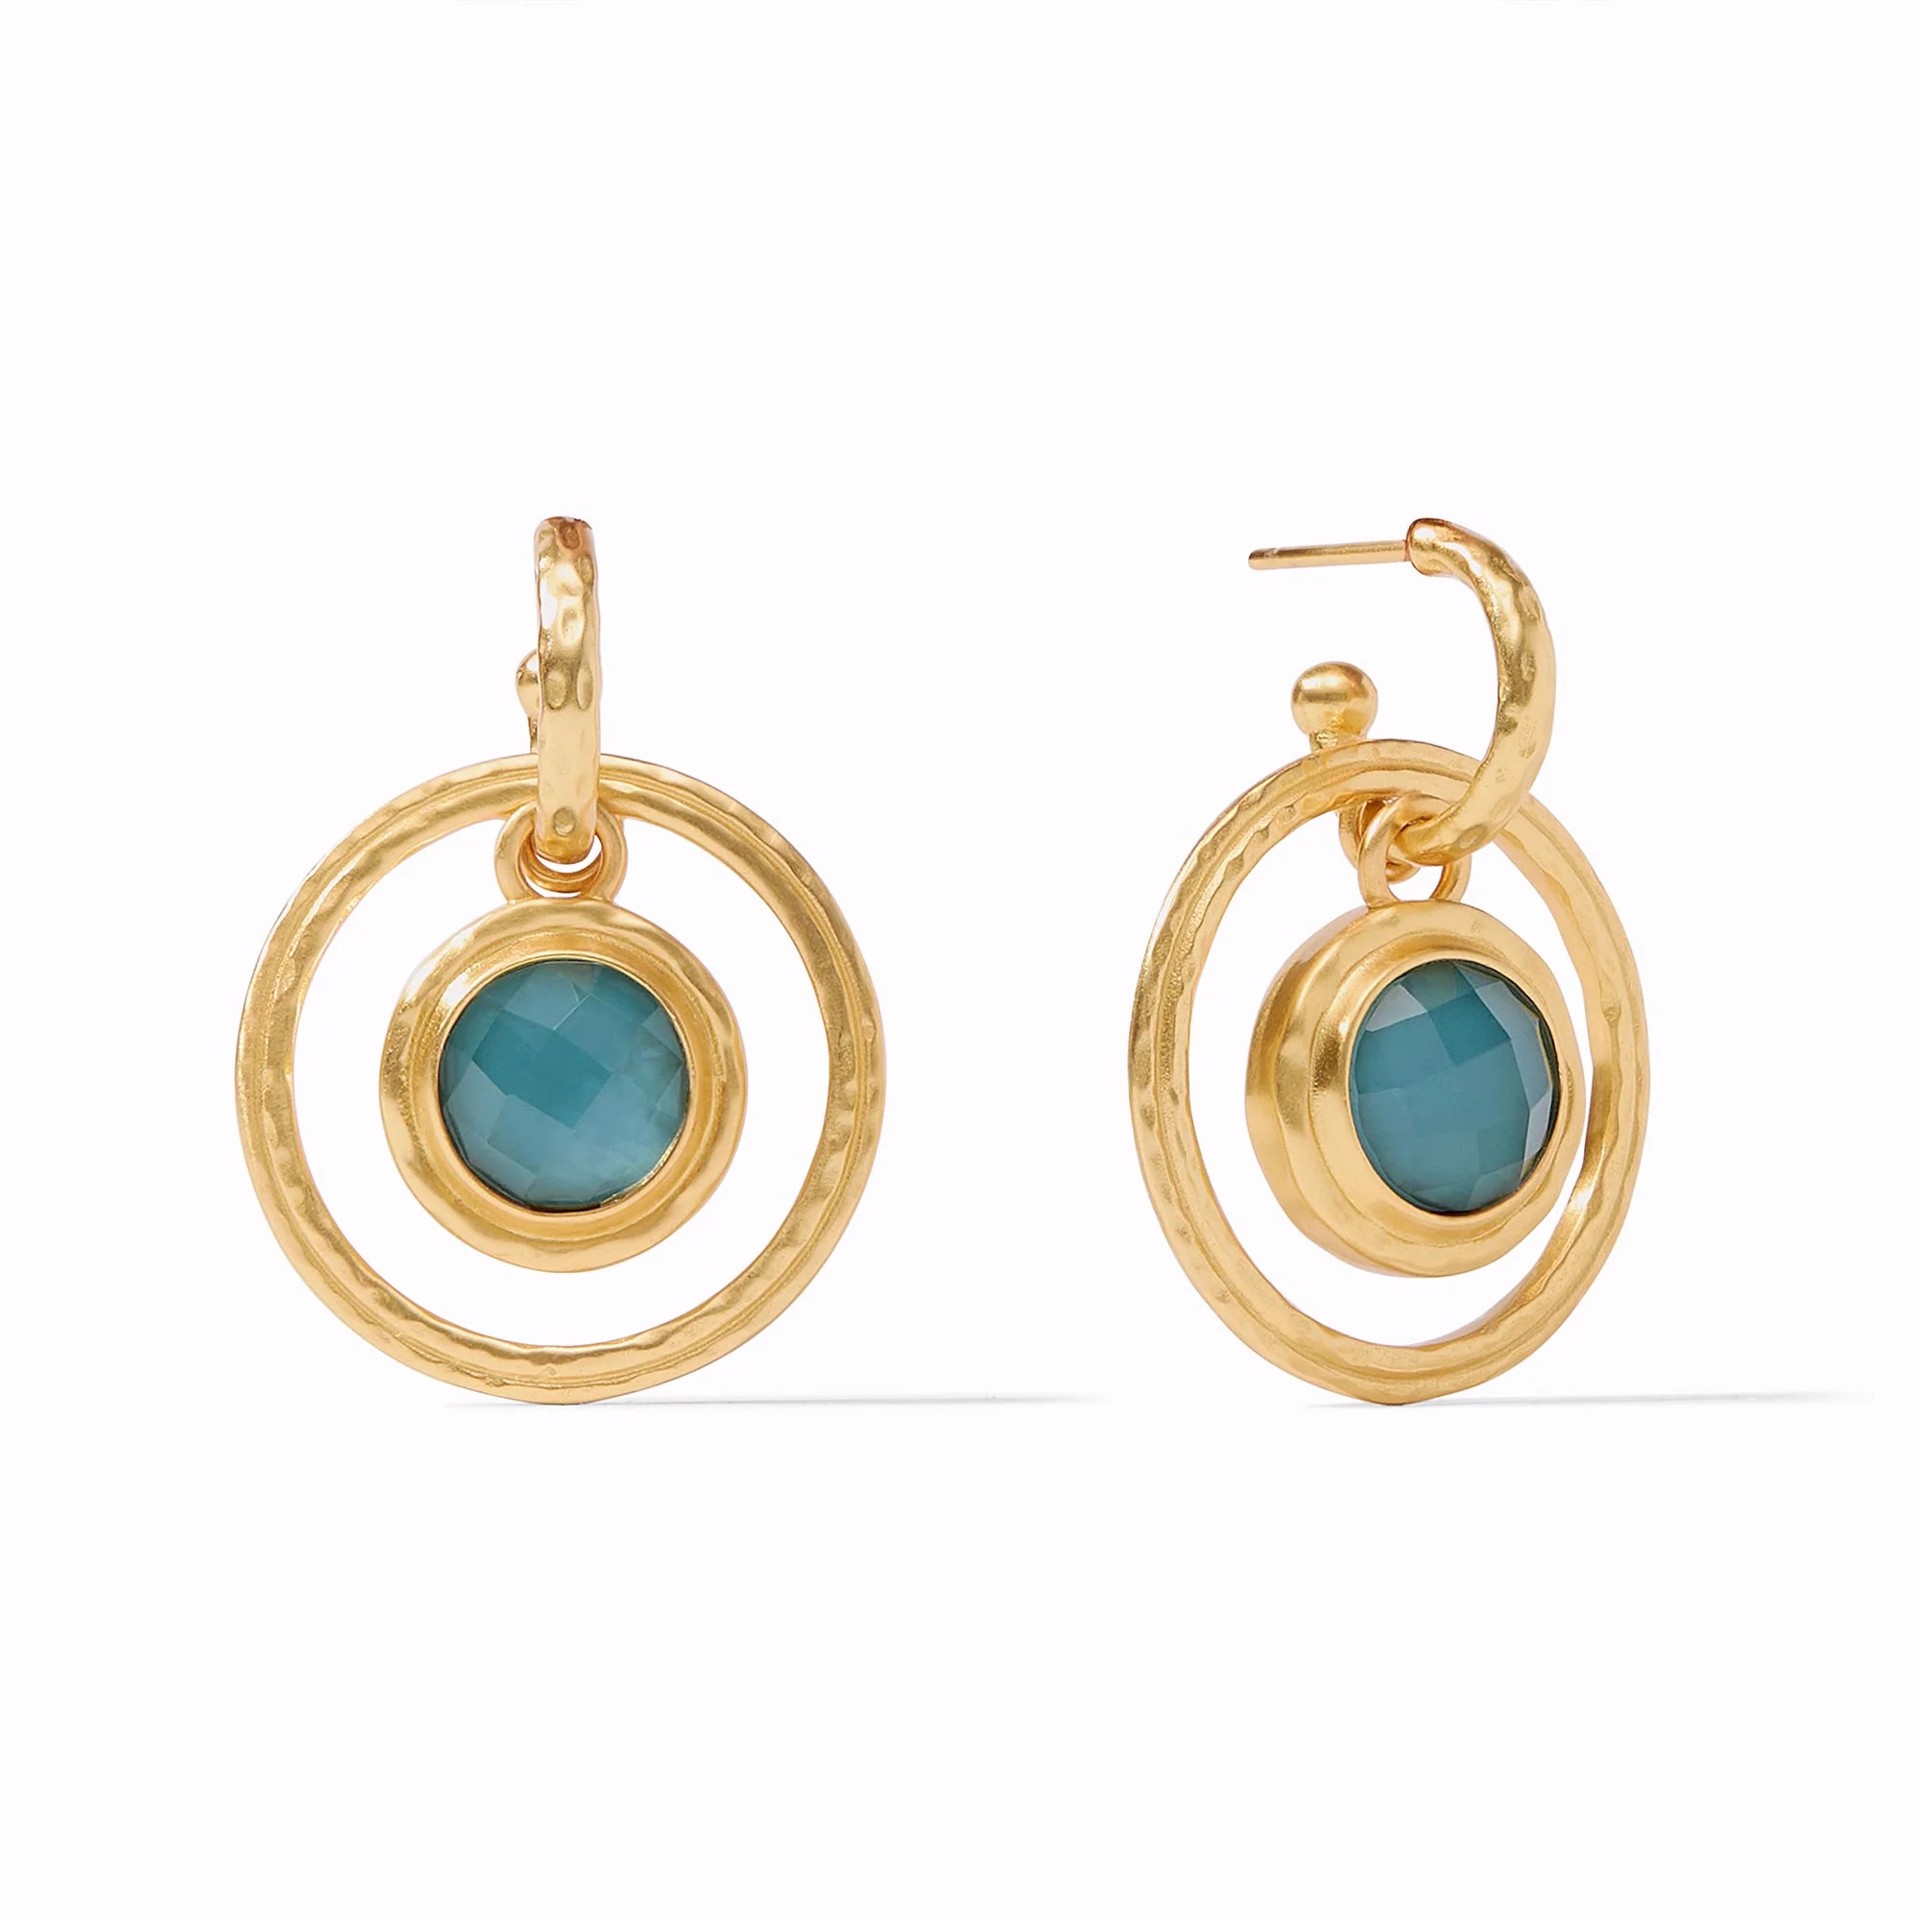 Astor 6 in 1 Charm Earring - Peacock Blue by Julie Vos